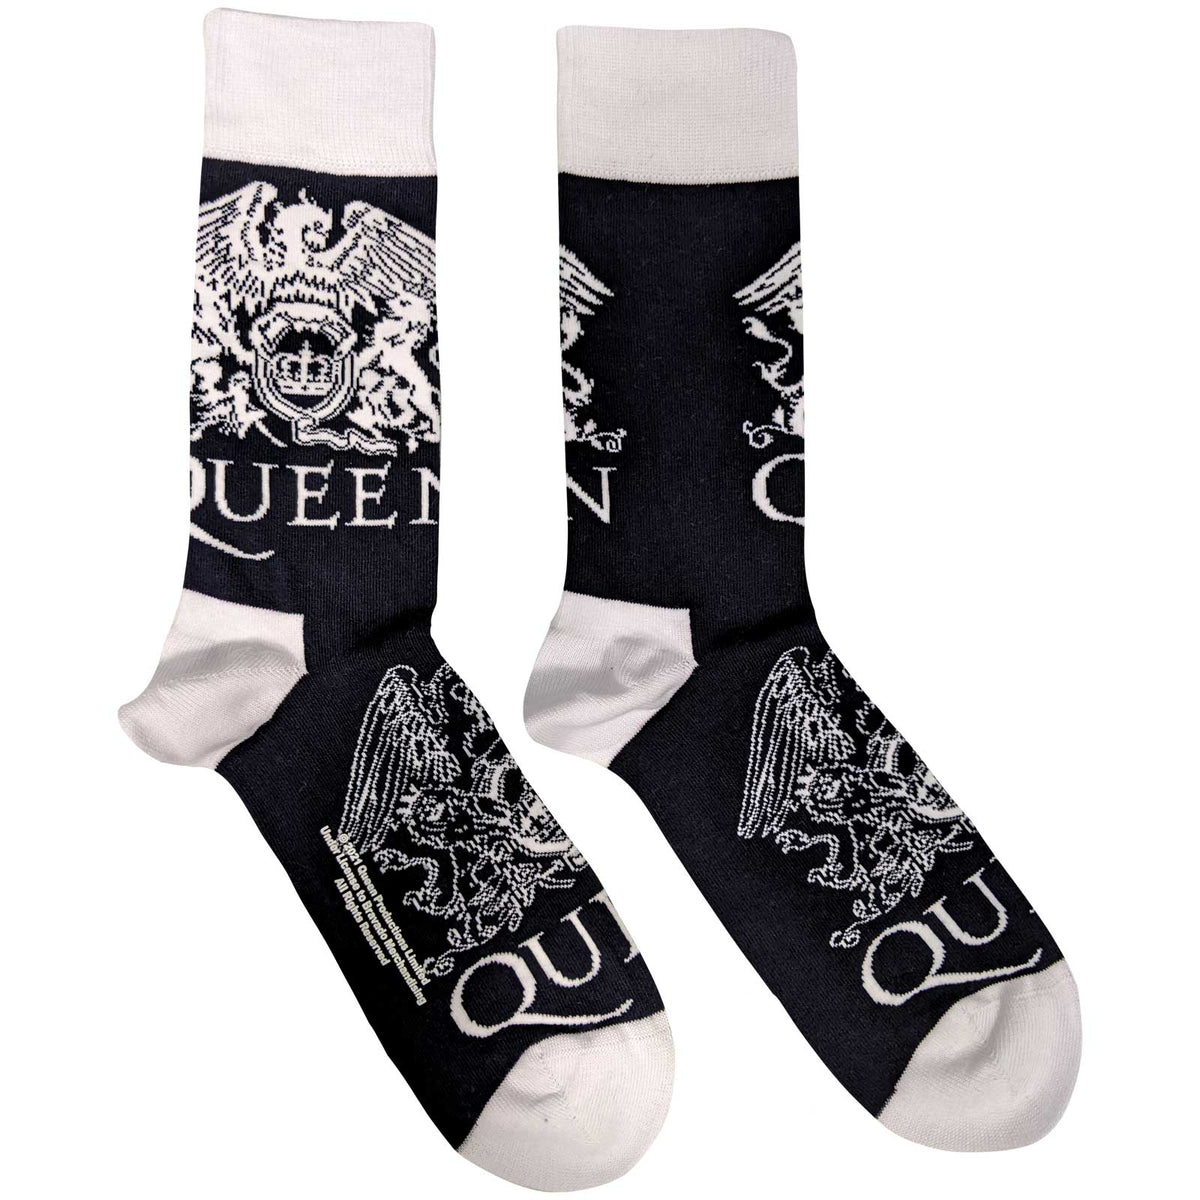 Queen Unisex Ankle Socks - White Crests (UK Size 7-11)